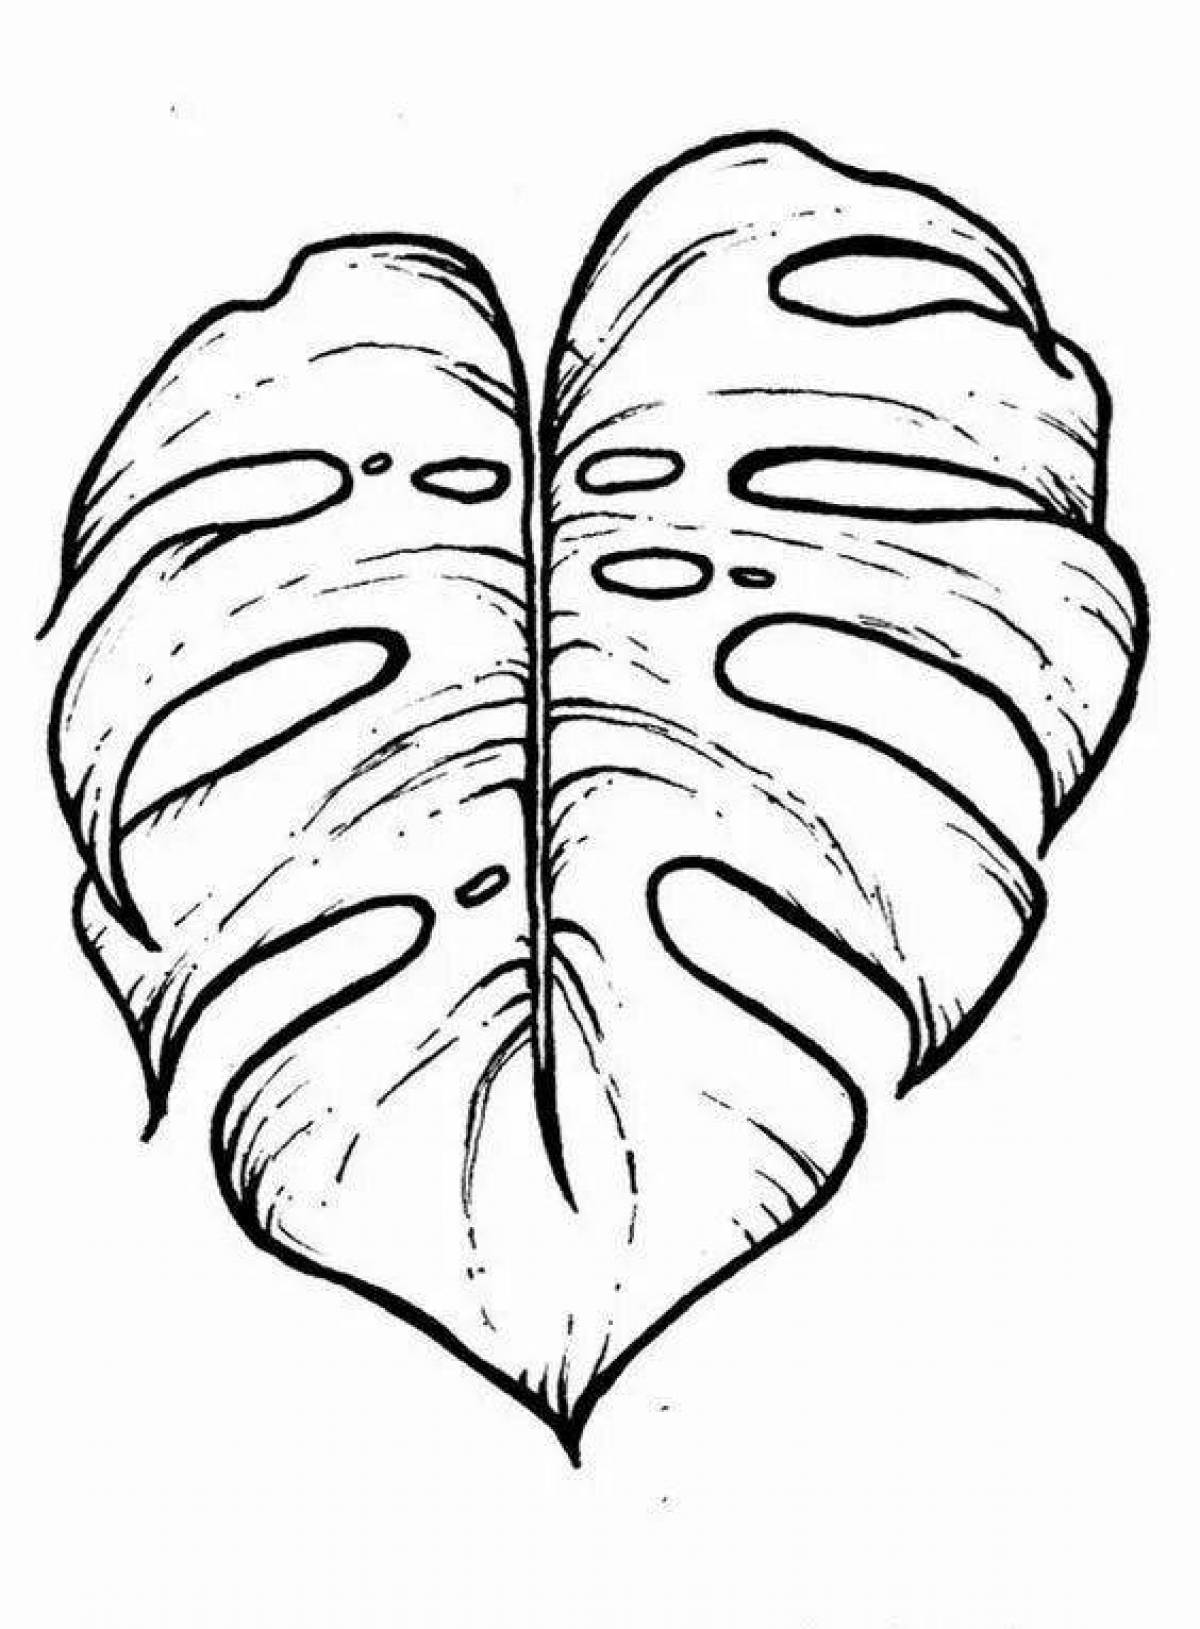 Delightful monstera coloring page